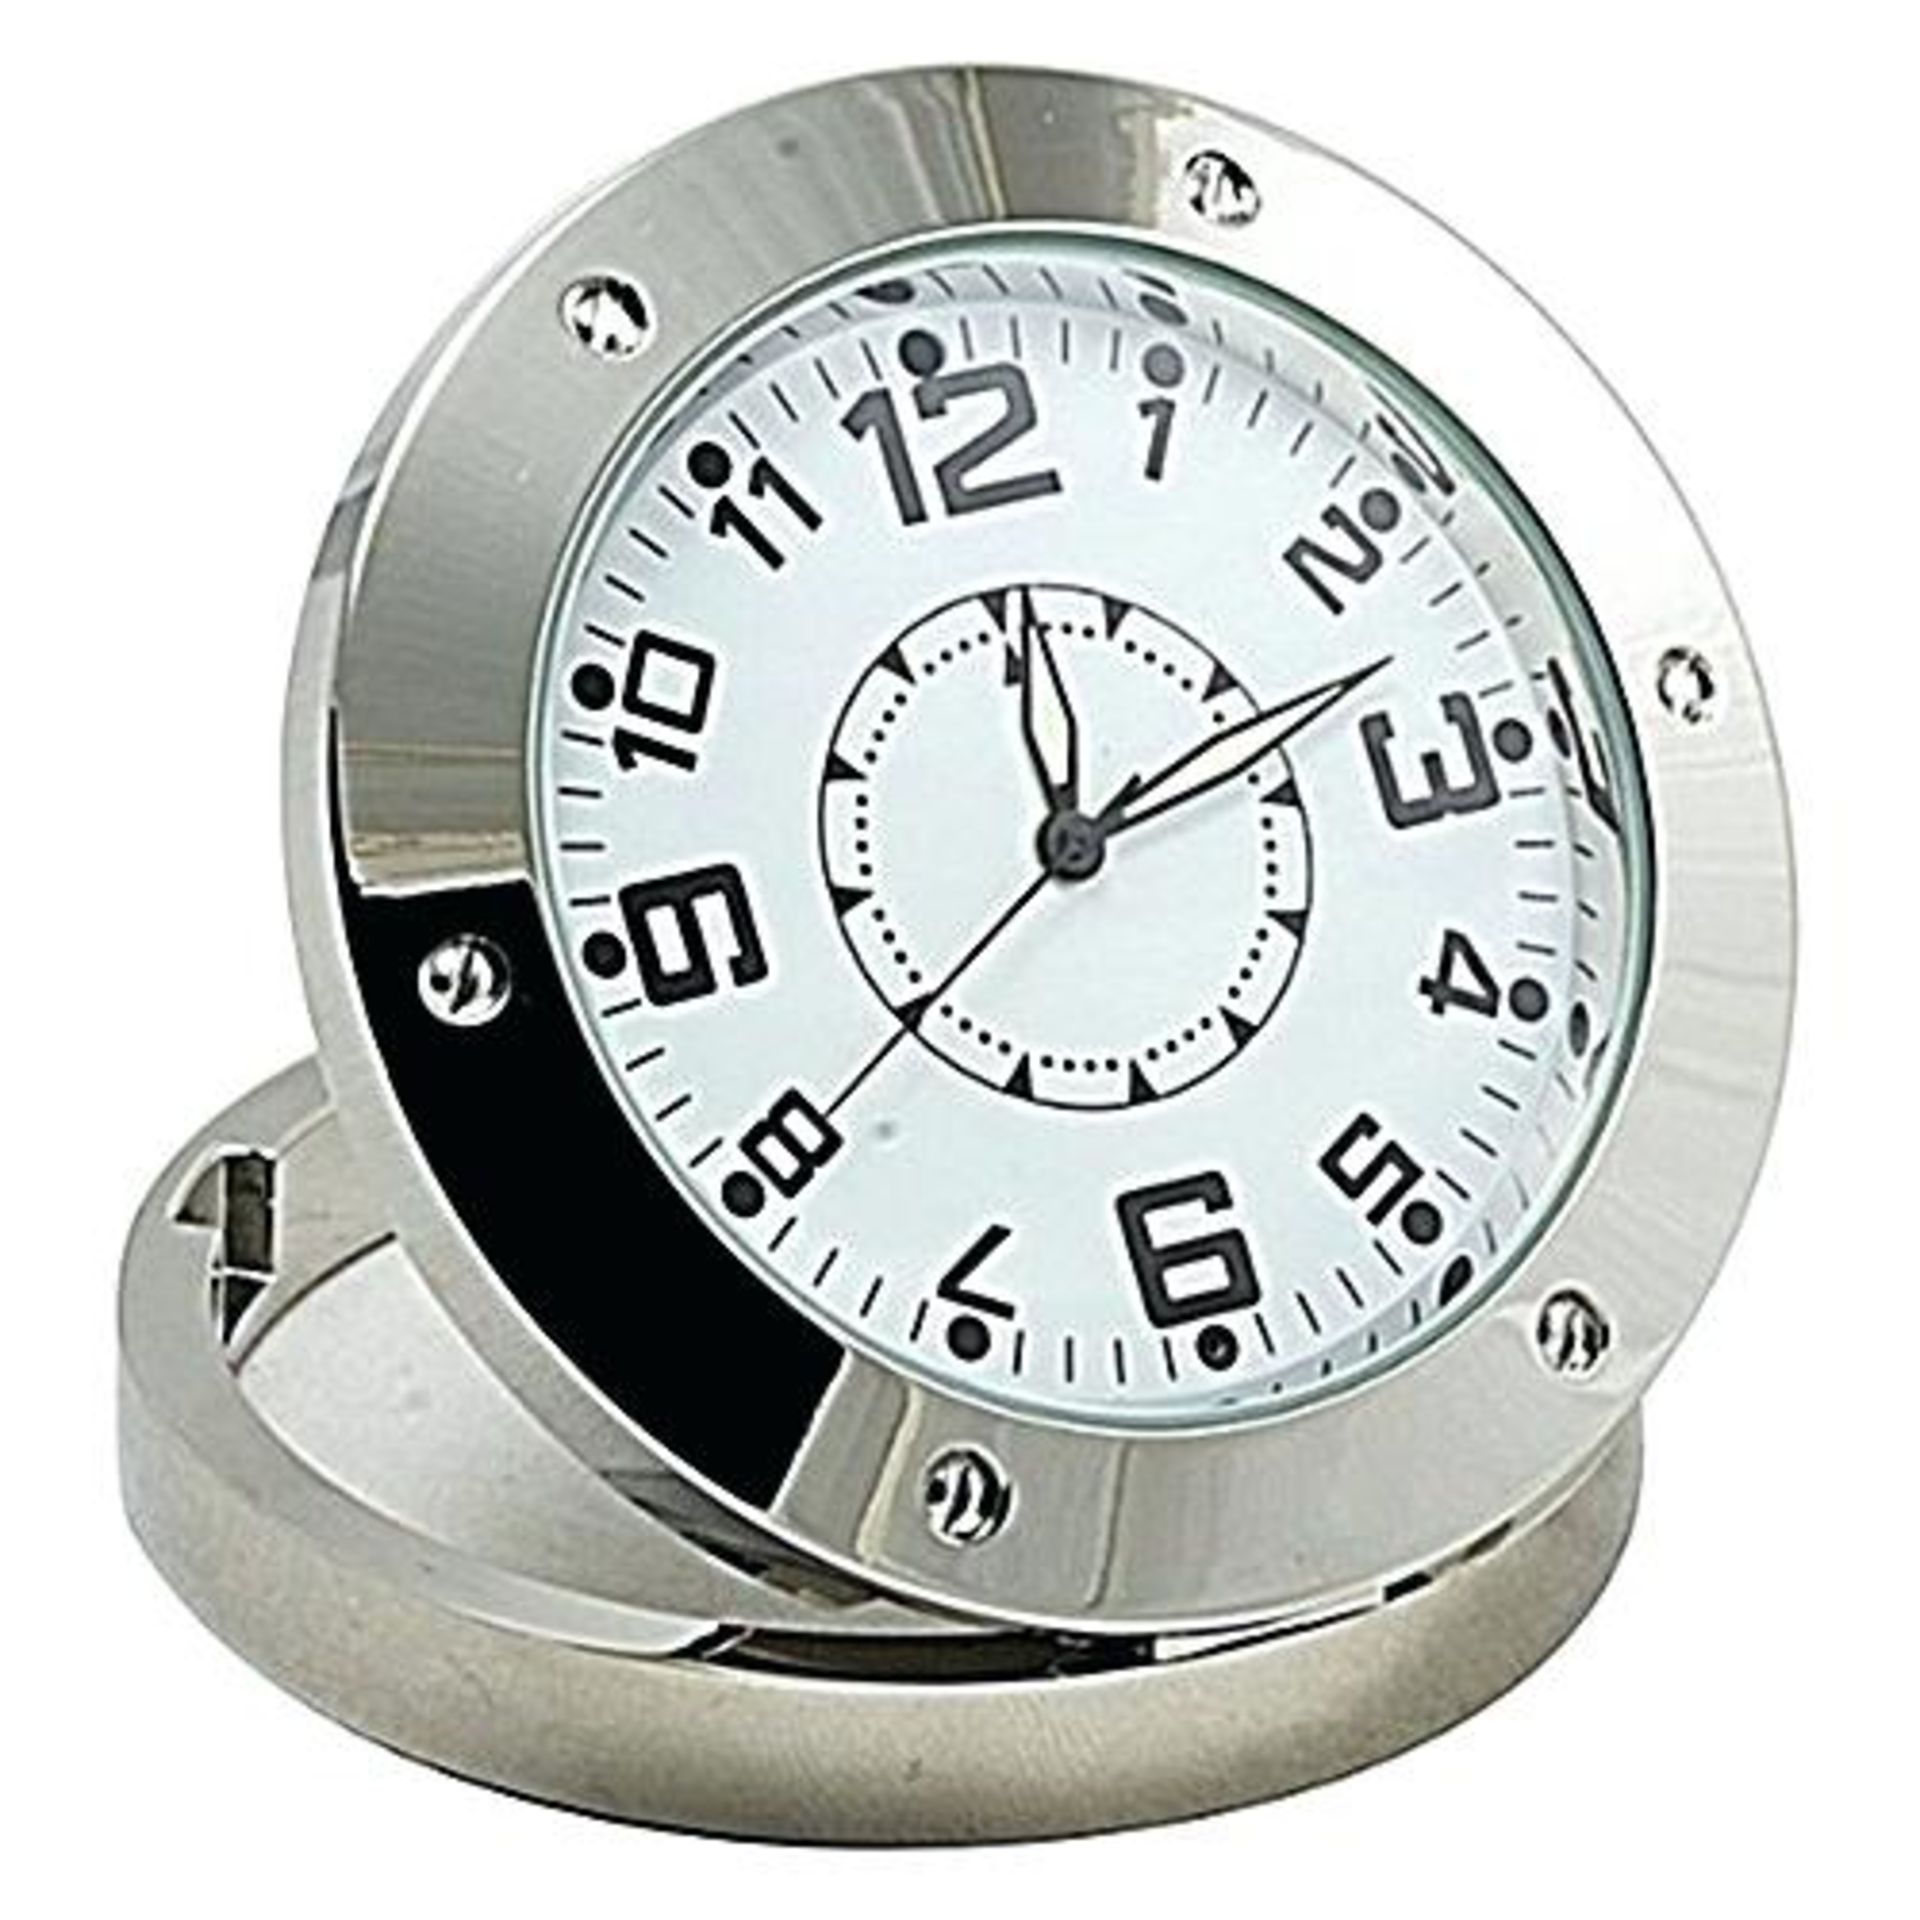 V Brand New Stainless Steel Security Spy Clock-8gb Mini SD Card-Can Be Upgraded To 32gb-AVi Video